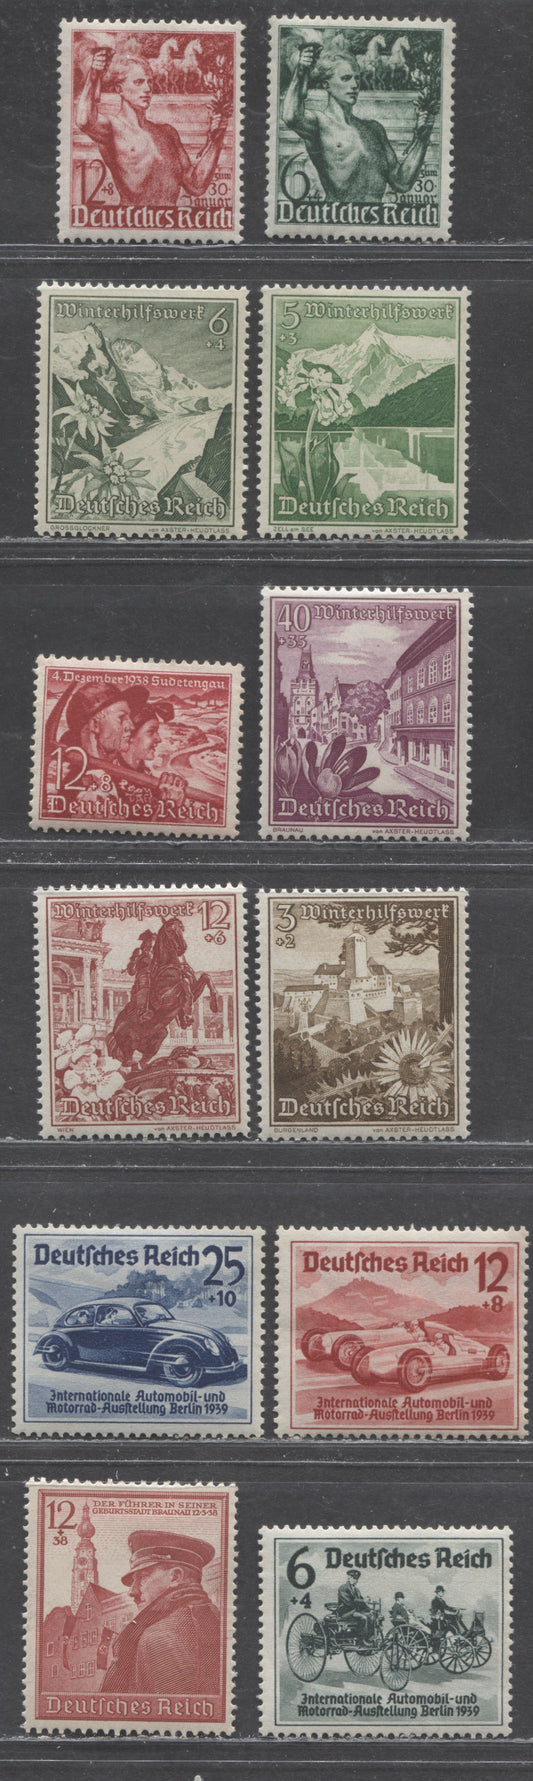 Lot 91 Germany SC#B116/B137 1938 Anniversary Of Assumption Of Power - Hitler's 50th Birthday Issues, 12 F/VFOG Singles, Click on Listing to See ALL Pictures, Estimated Value $20